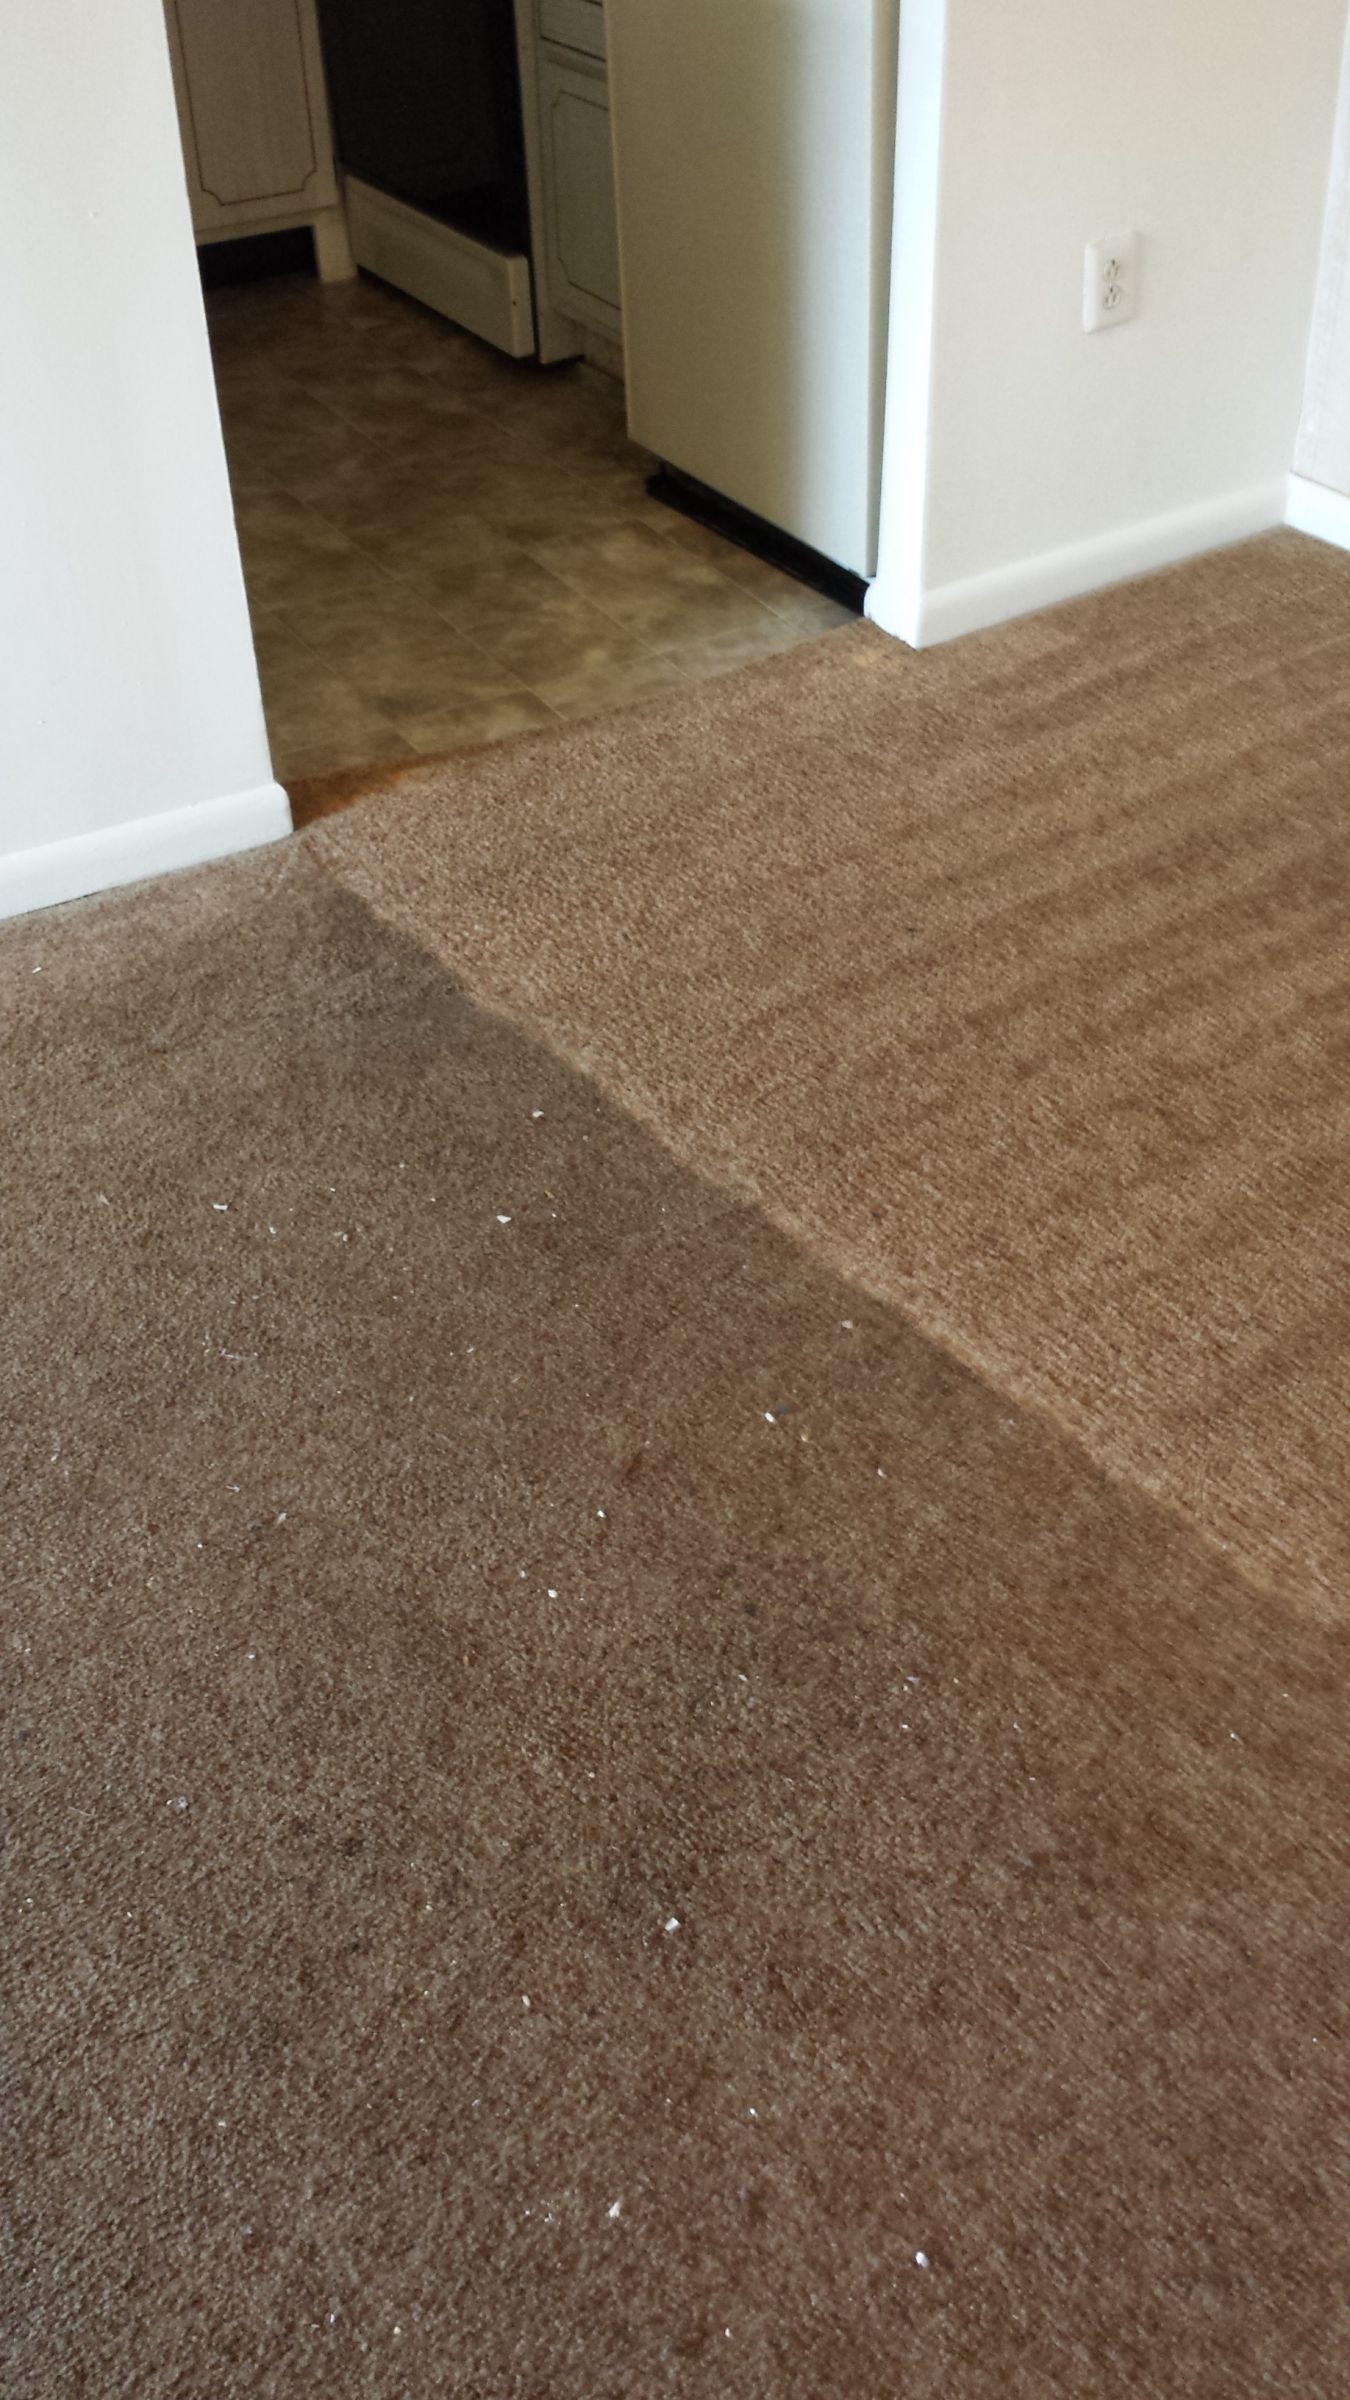 Moorestown Carpet Cleaning. Why Supreme Cleaning Matters